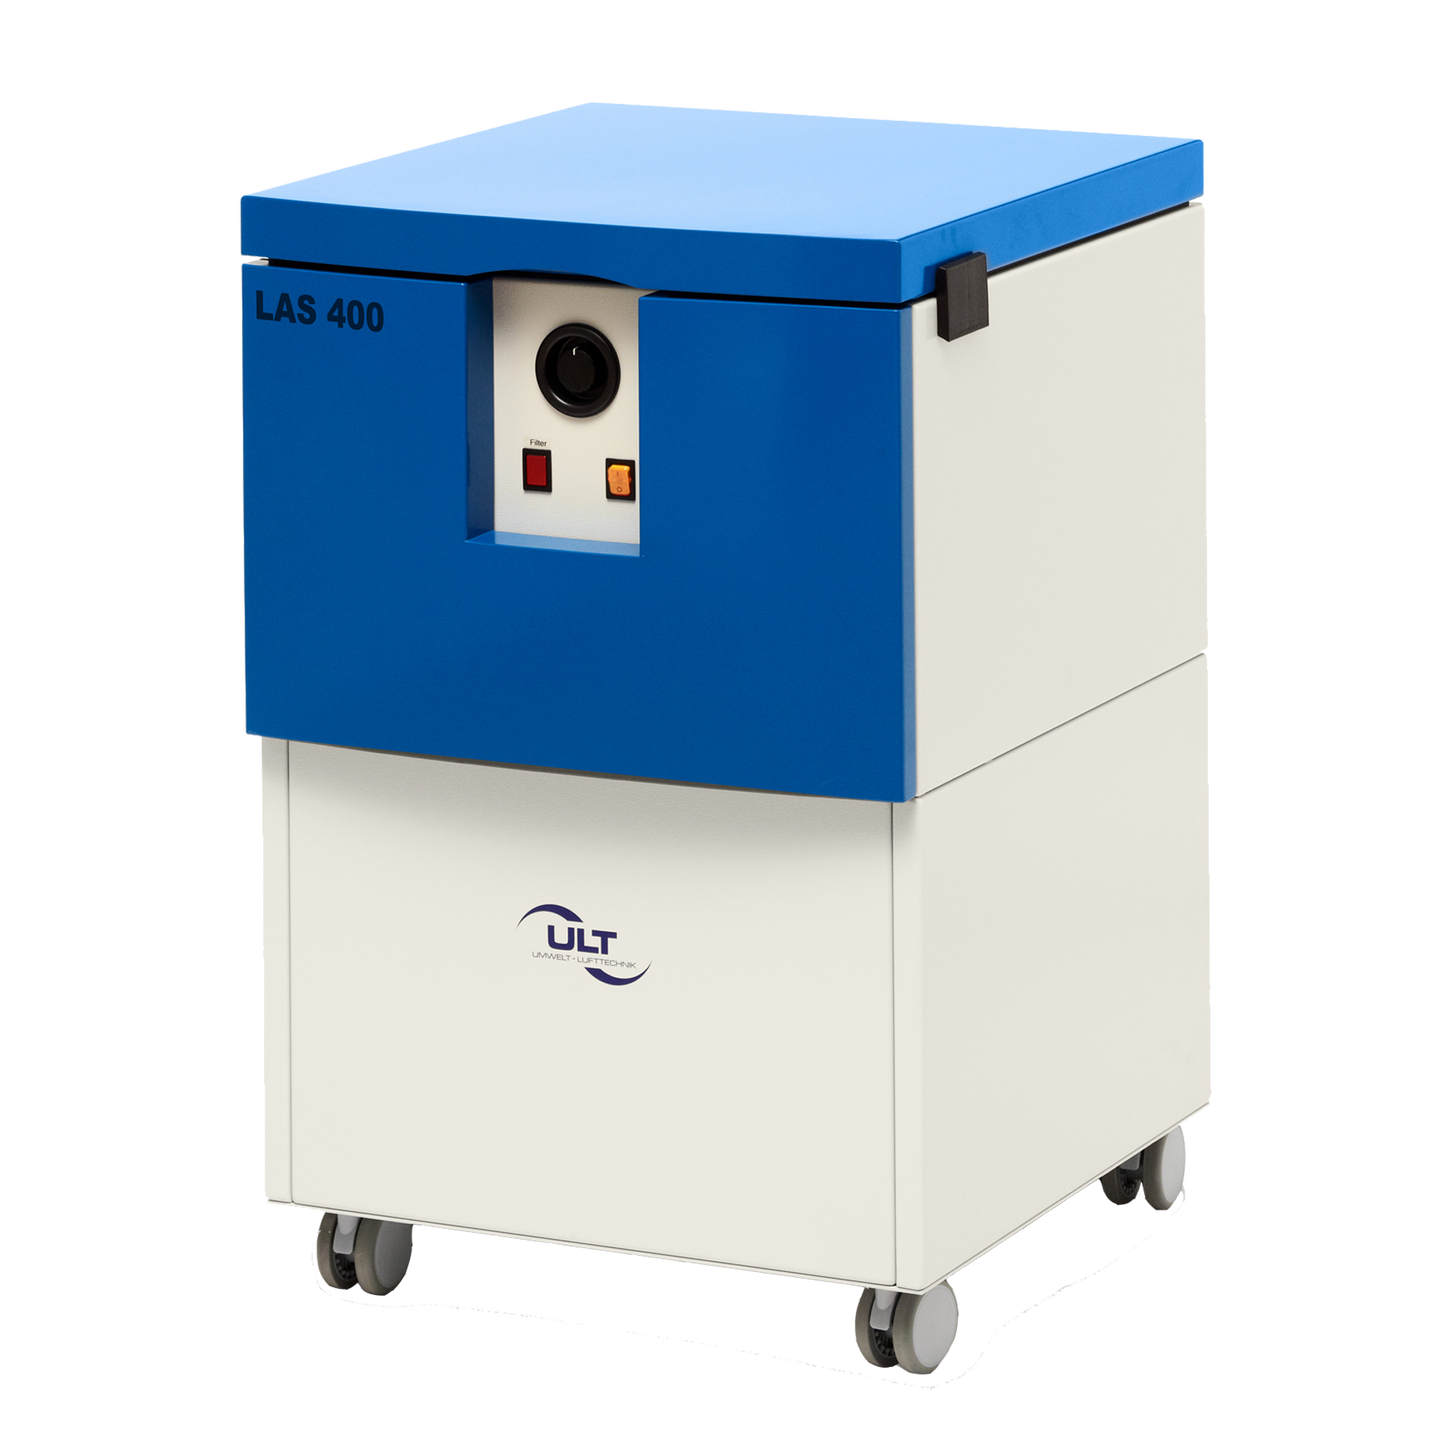 LAS 400 - Laser Dust and Smoke Extraction Unit